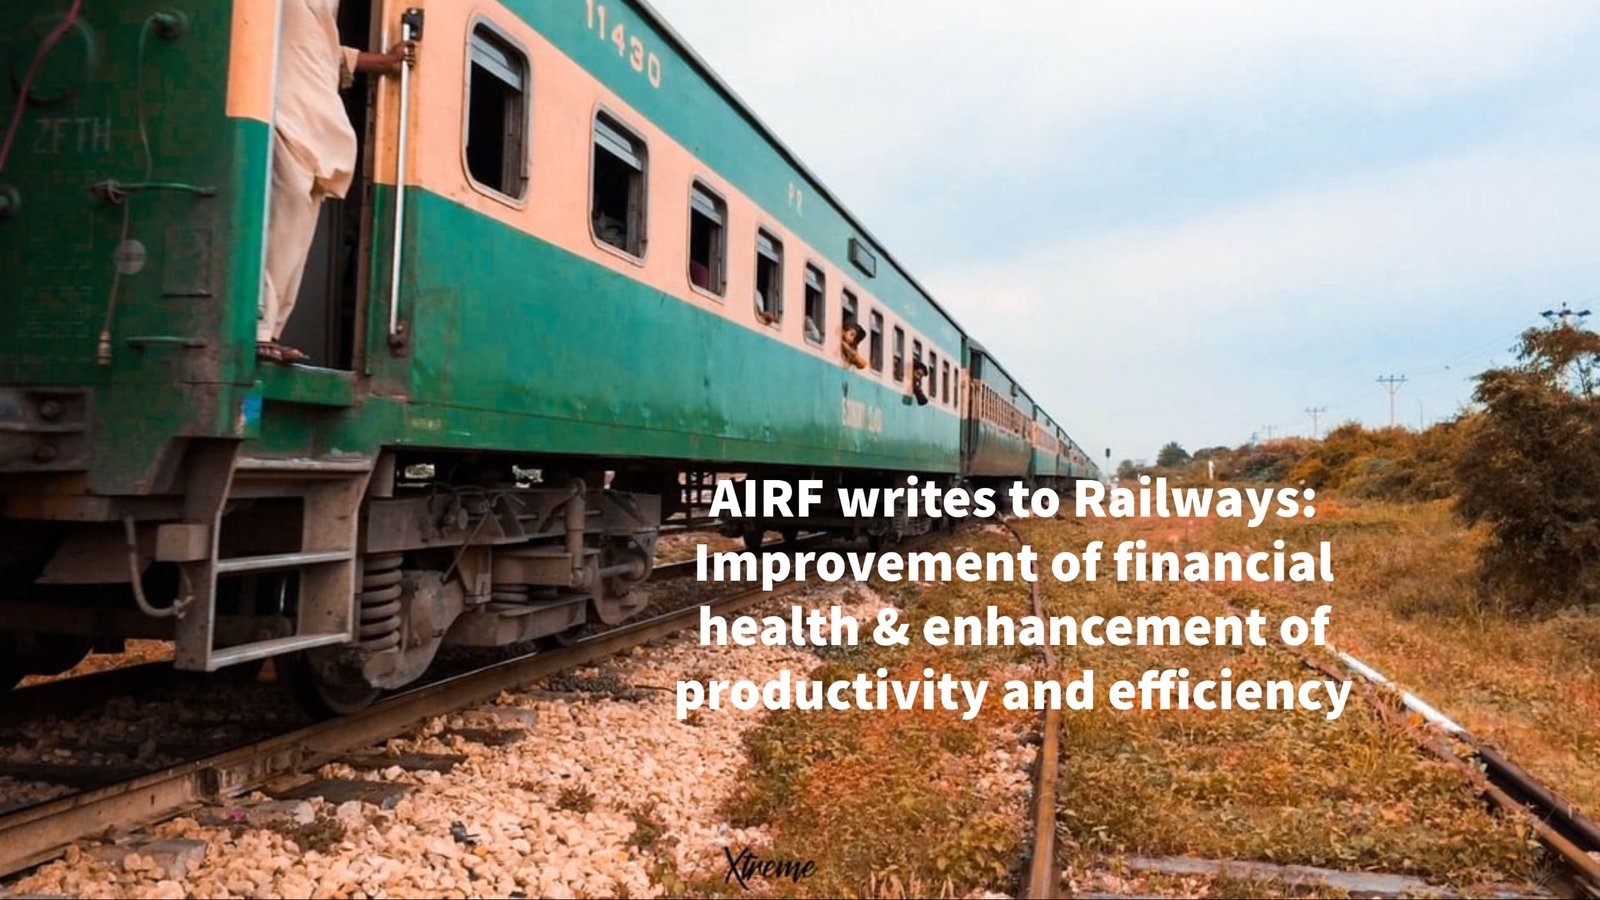 AIRF writes to Railways: Improvement of financial health & enhancement of productivity and efficiency